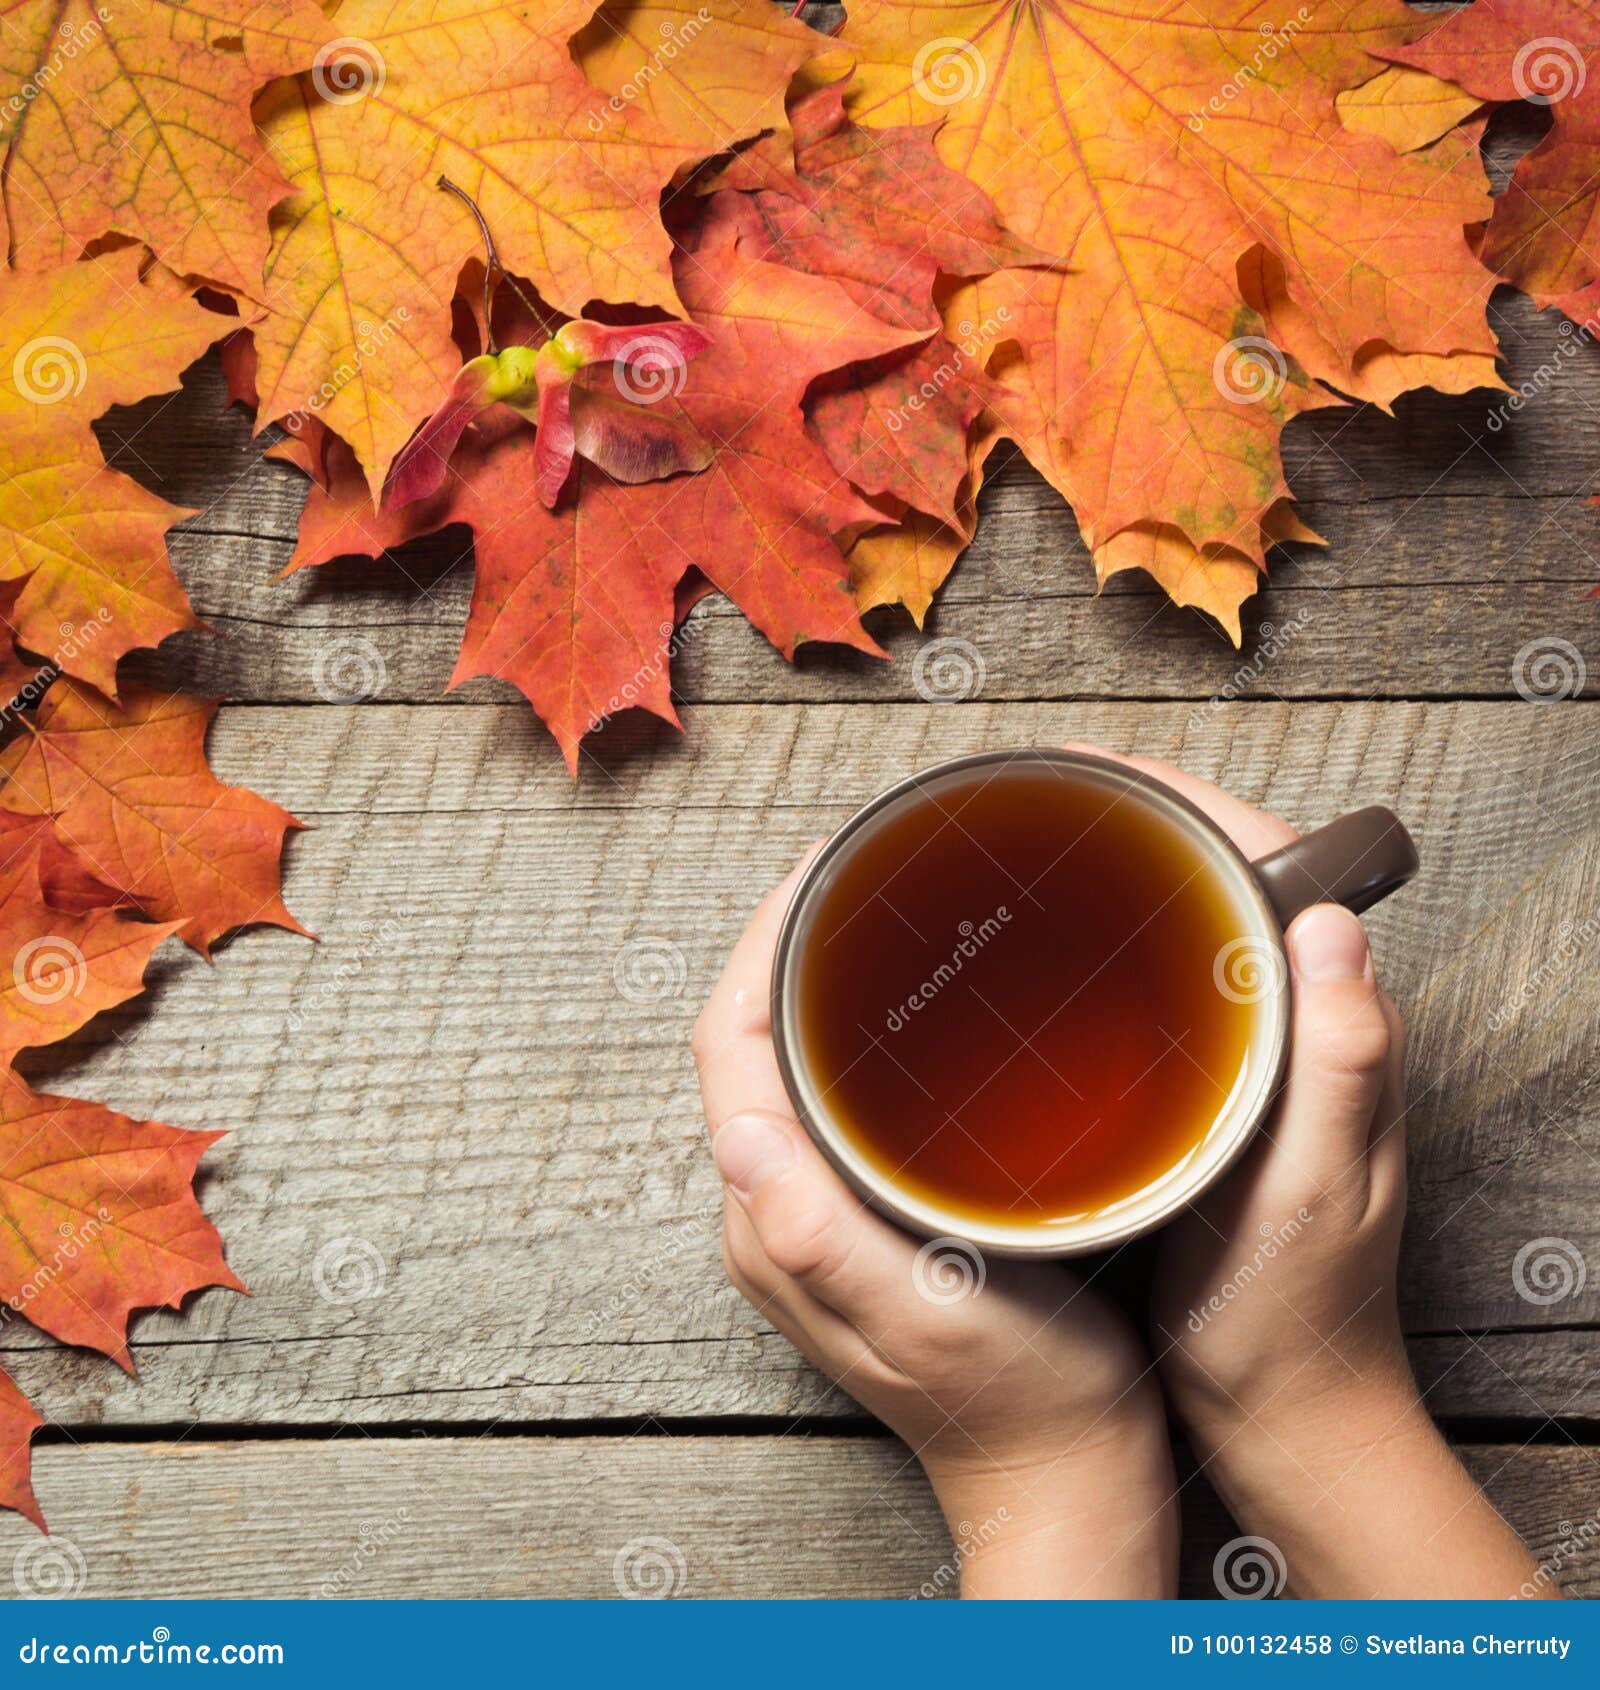 Cup Of Tea In Hand Colorful Autumn Leaves On Wooden Board - 